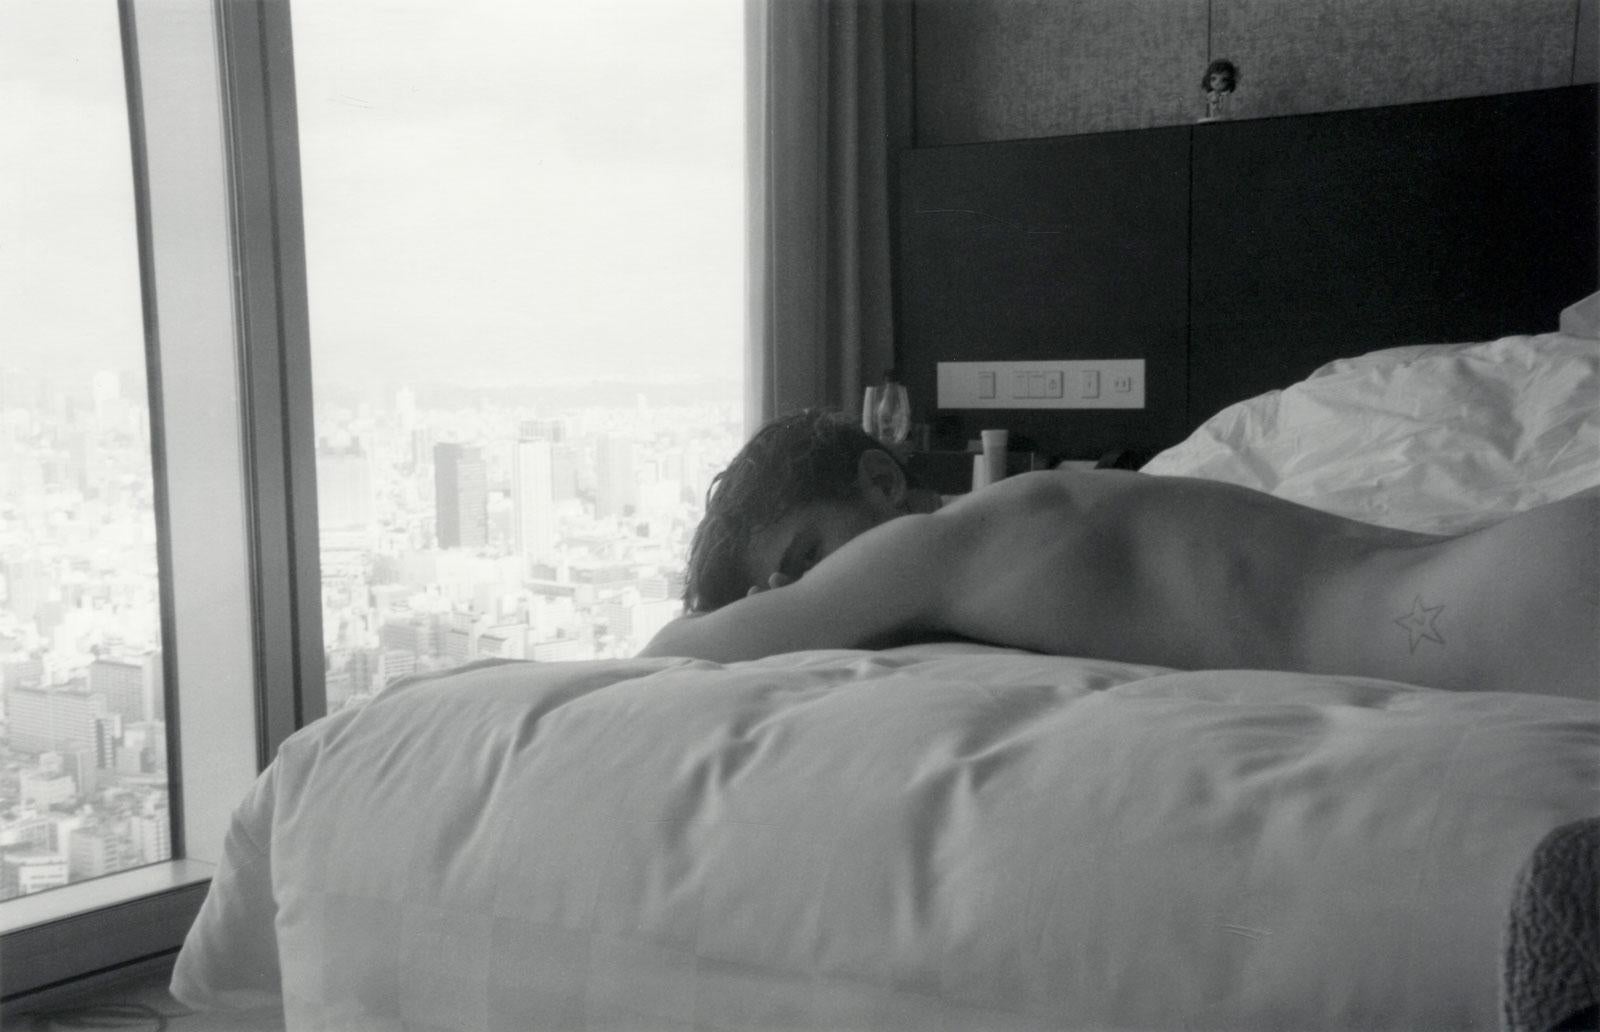 Sebastian Perinotti Nude Photograph - Bryce (View of Osaka, Japan from city's tallest building is in background)